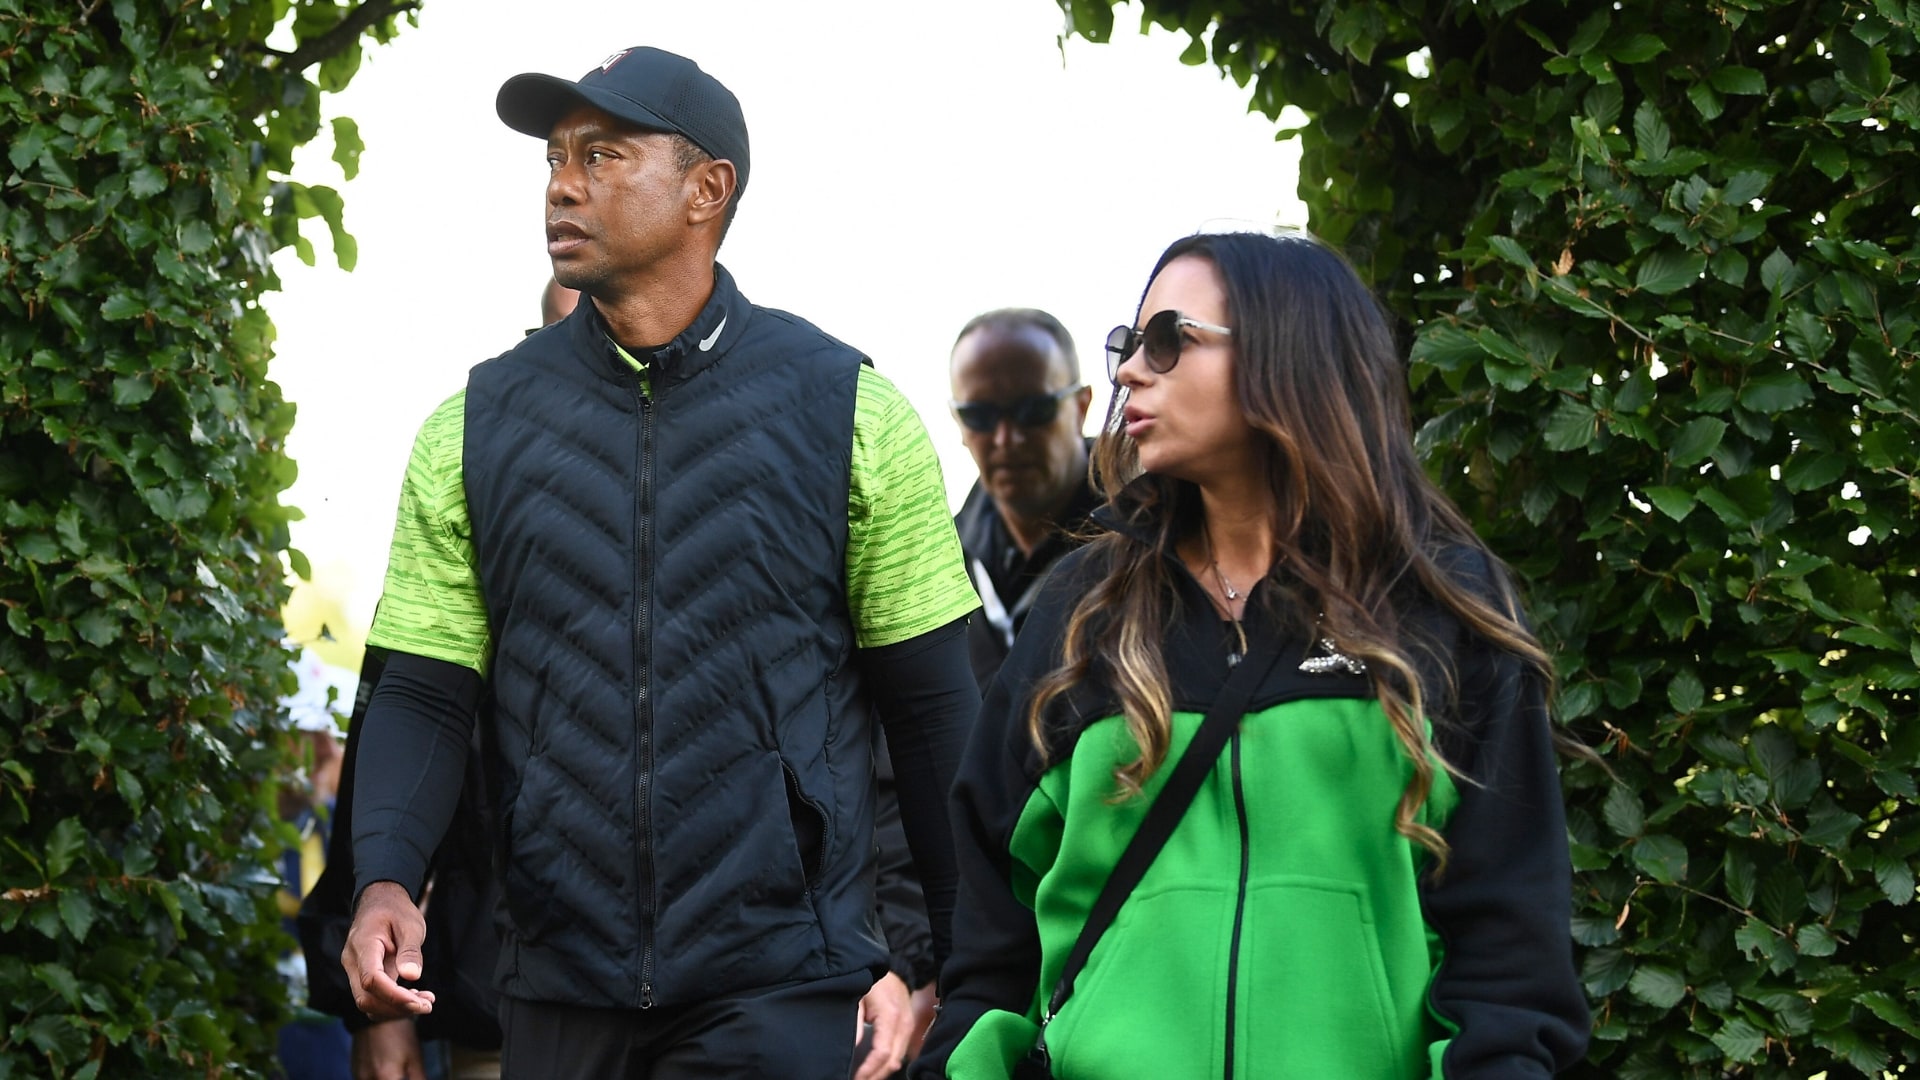 Tiger Woods’ ex claims he sexually harassed her while she was employed by him